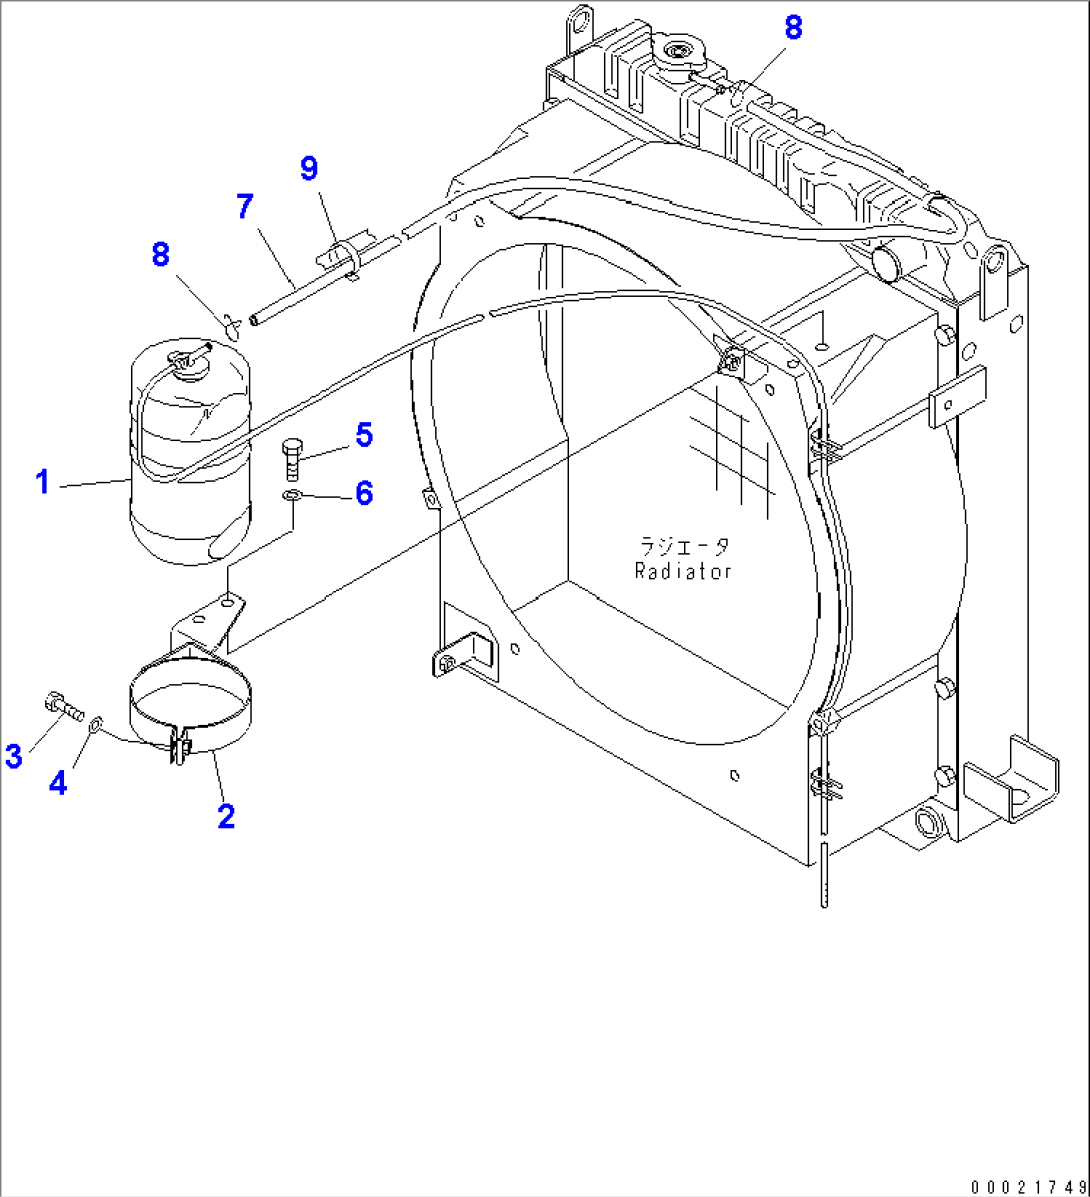 RADIATOR (RESERVE TANK AND PIPING)(#11501-)